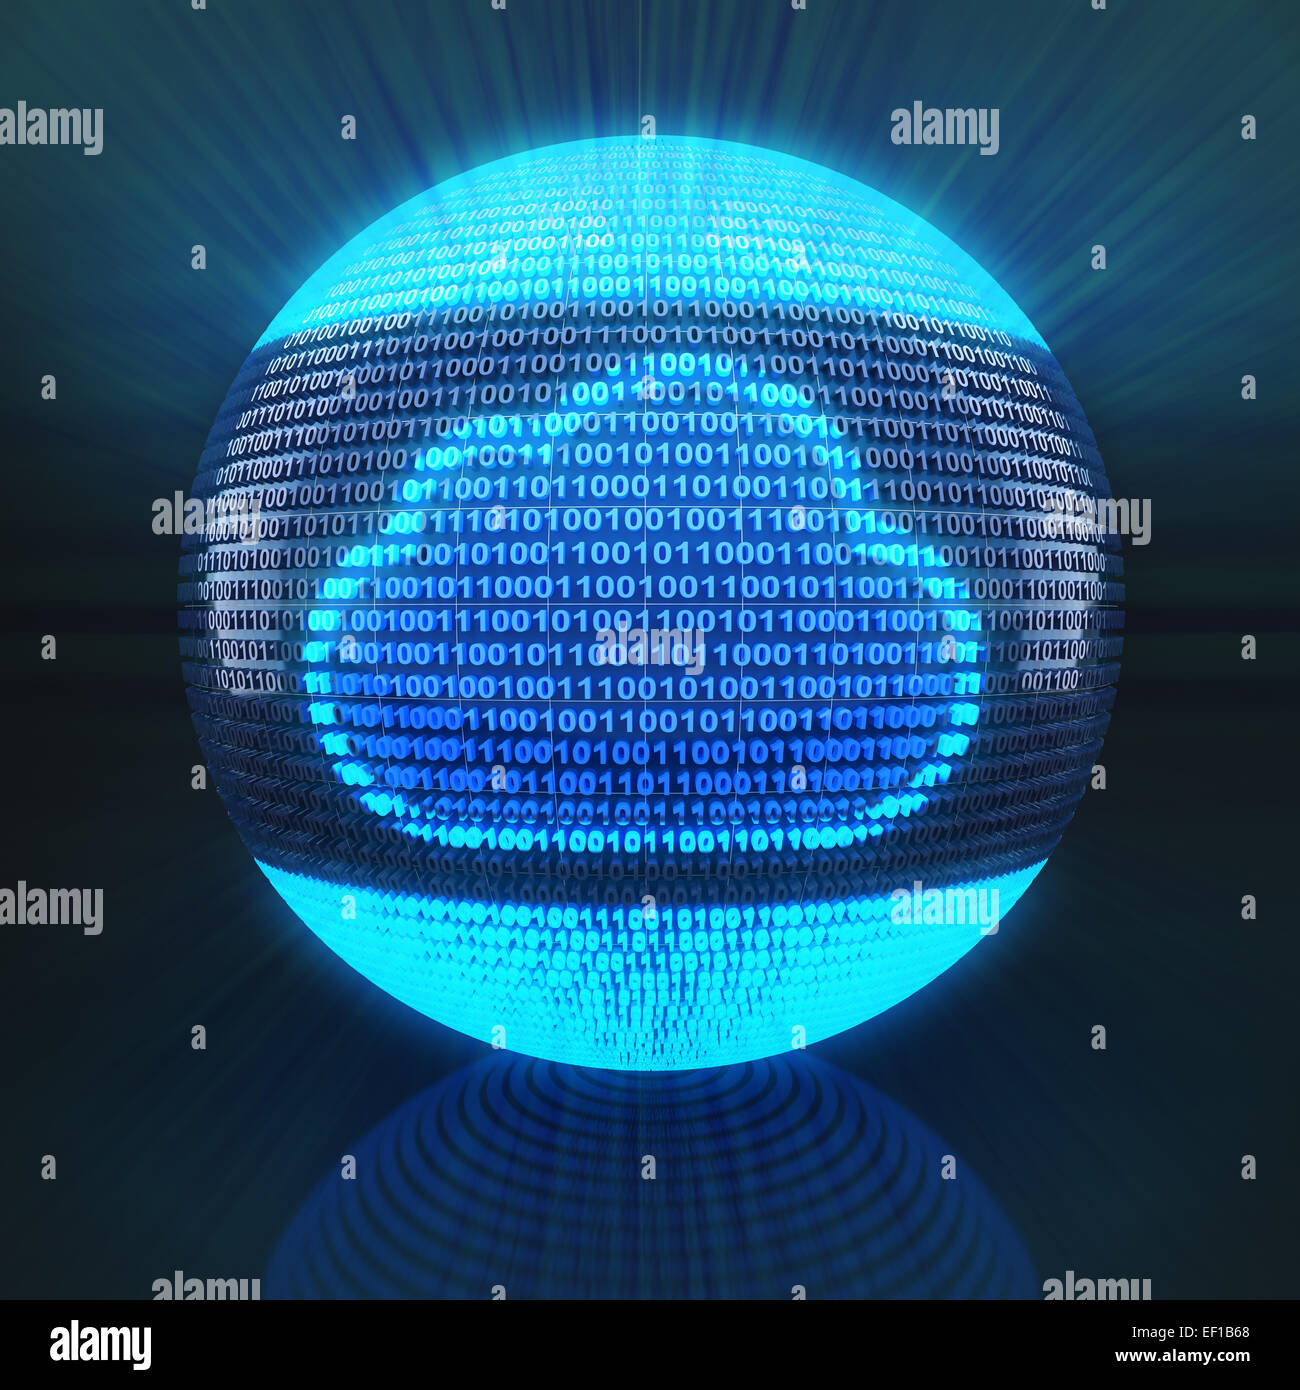 Cloud symbol on globe formed by binary code Stock Photo